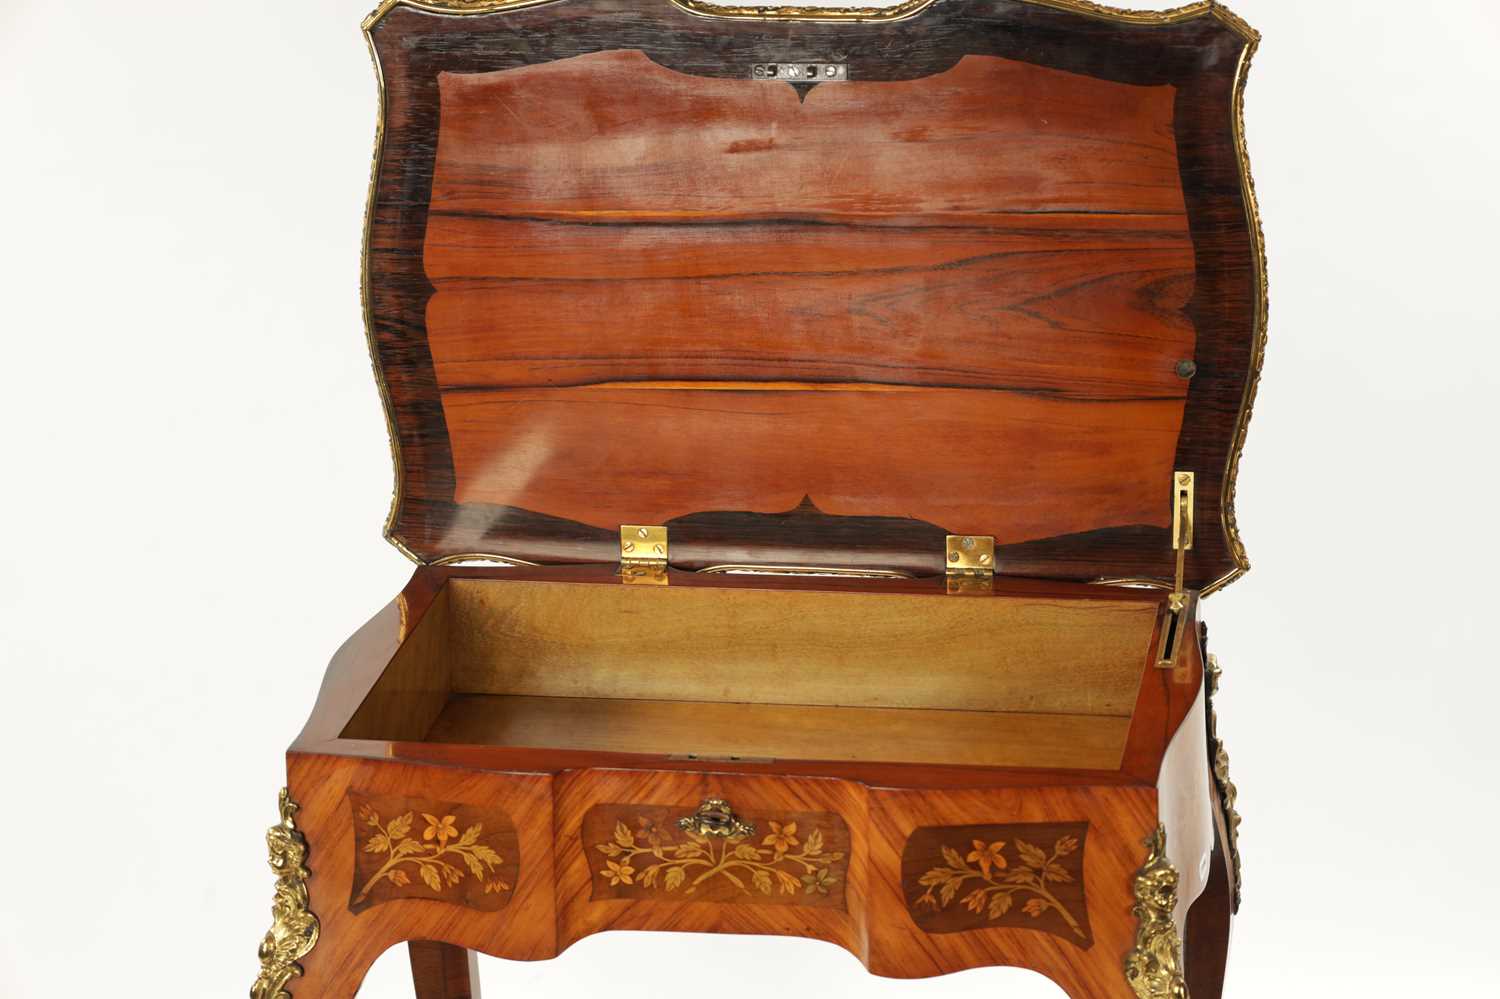 A FINE 19TH CENTURY BURR WALNUT AND MARQUETRY INLAID WORK TABLE - Image 7 of 7